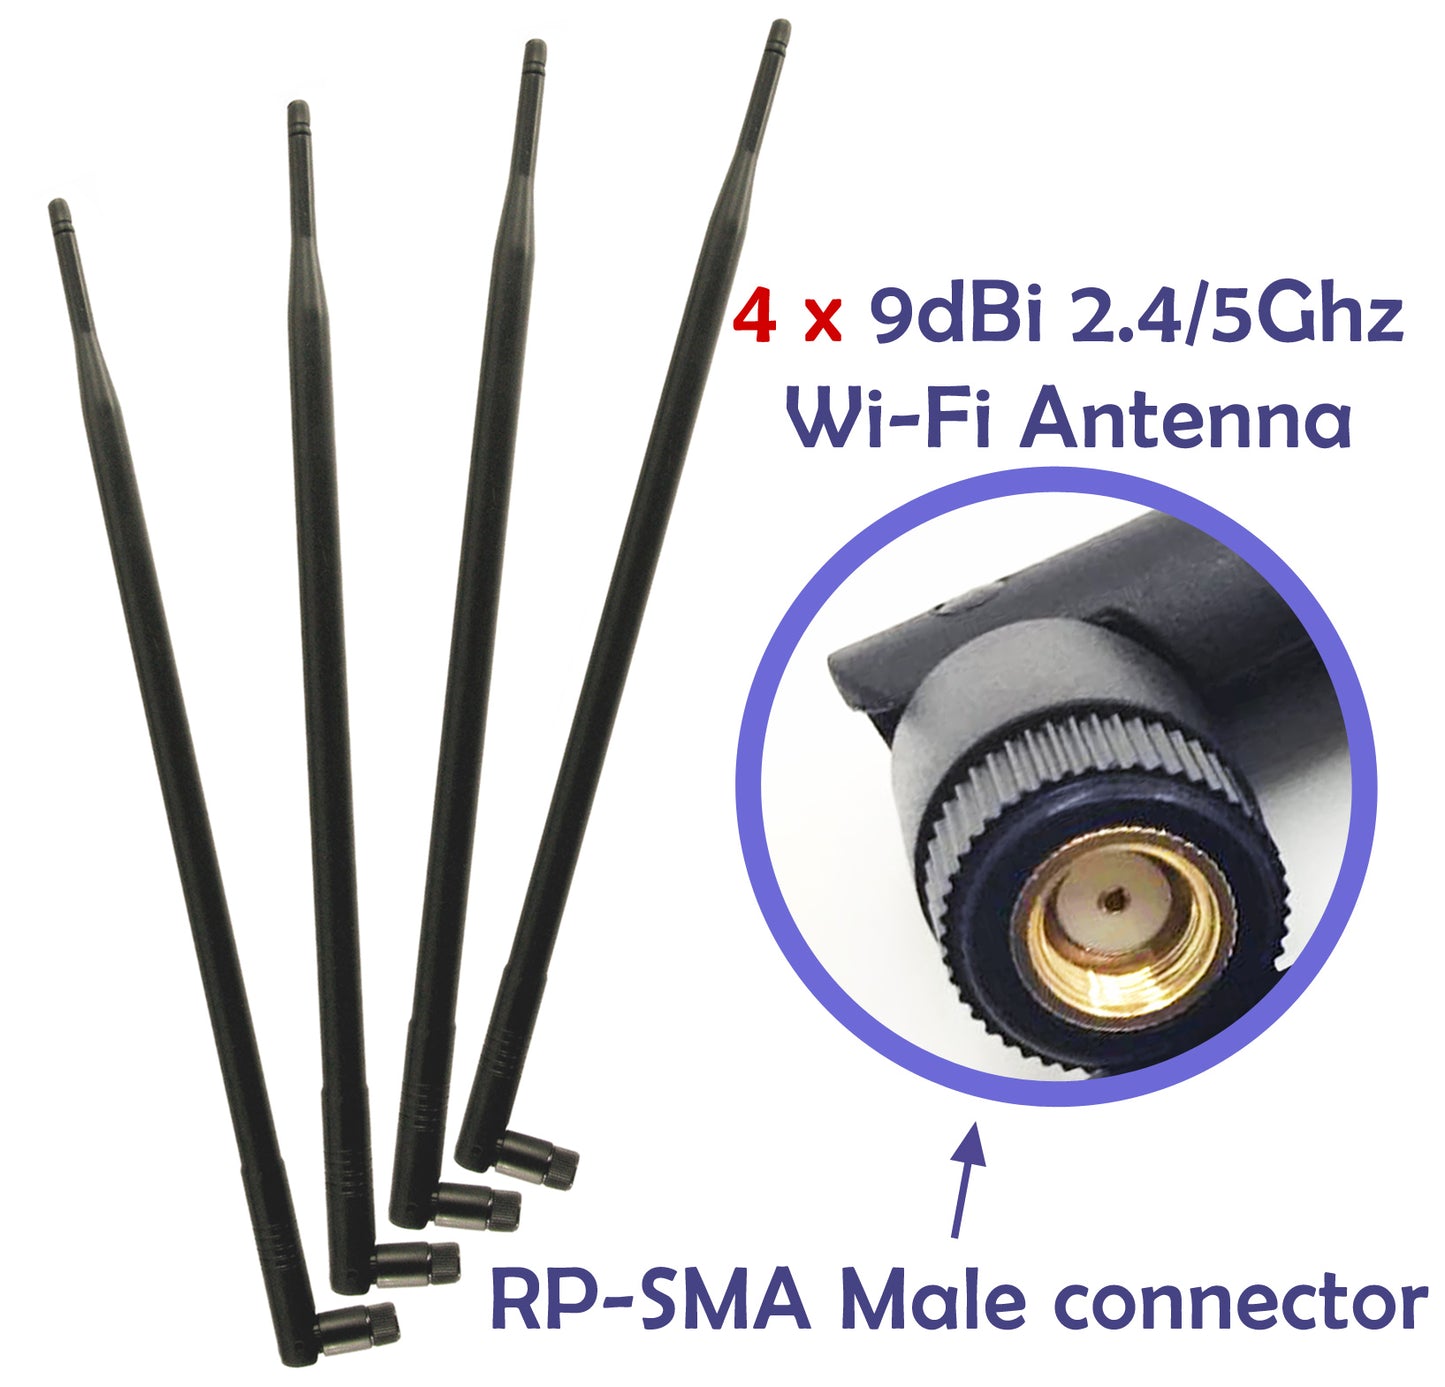 4 pcs of Universal 9dBi Wi-Fi 2.4/5GHz Dual-Band RP-SMA Male Antennas Extension for IP Wireless Security Camera Router and CCTV HD Wireless Camera System Video Antenna for NVR Security IP System